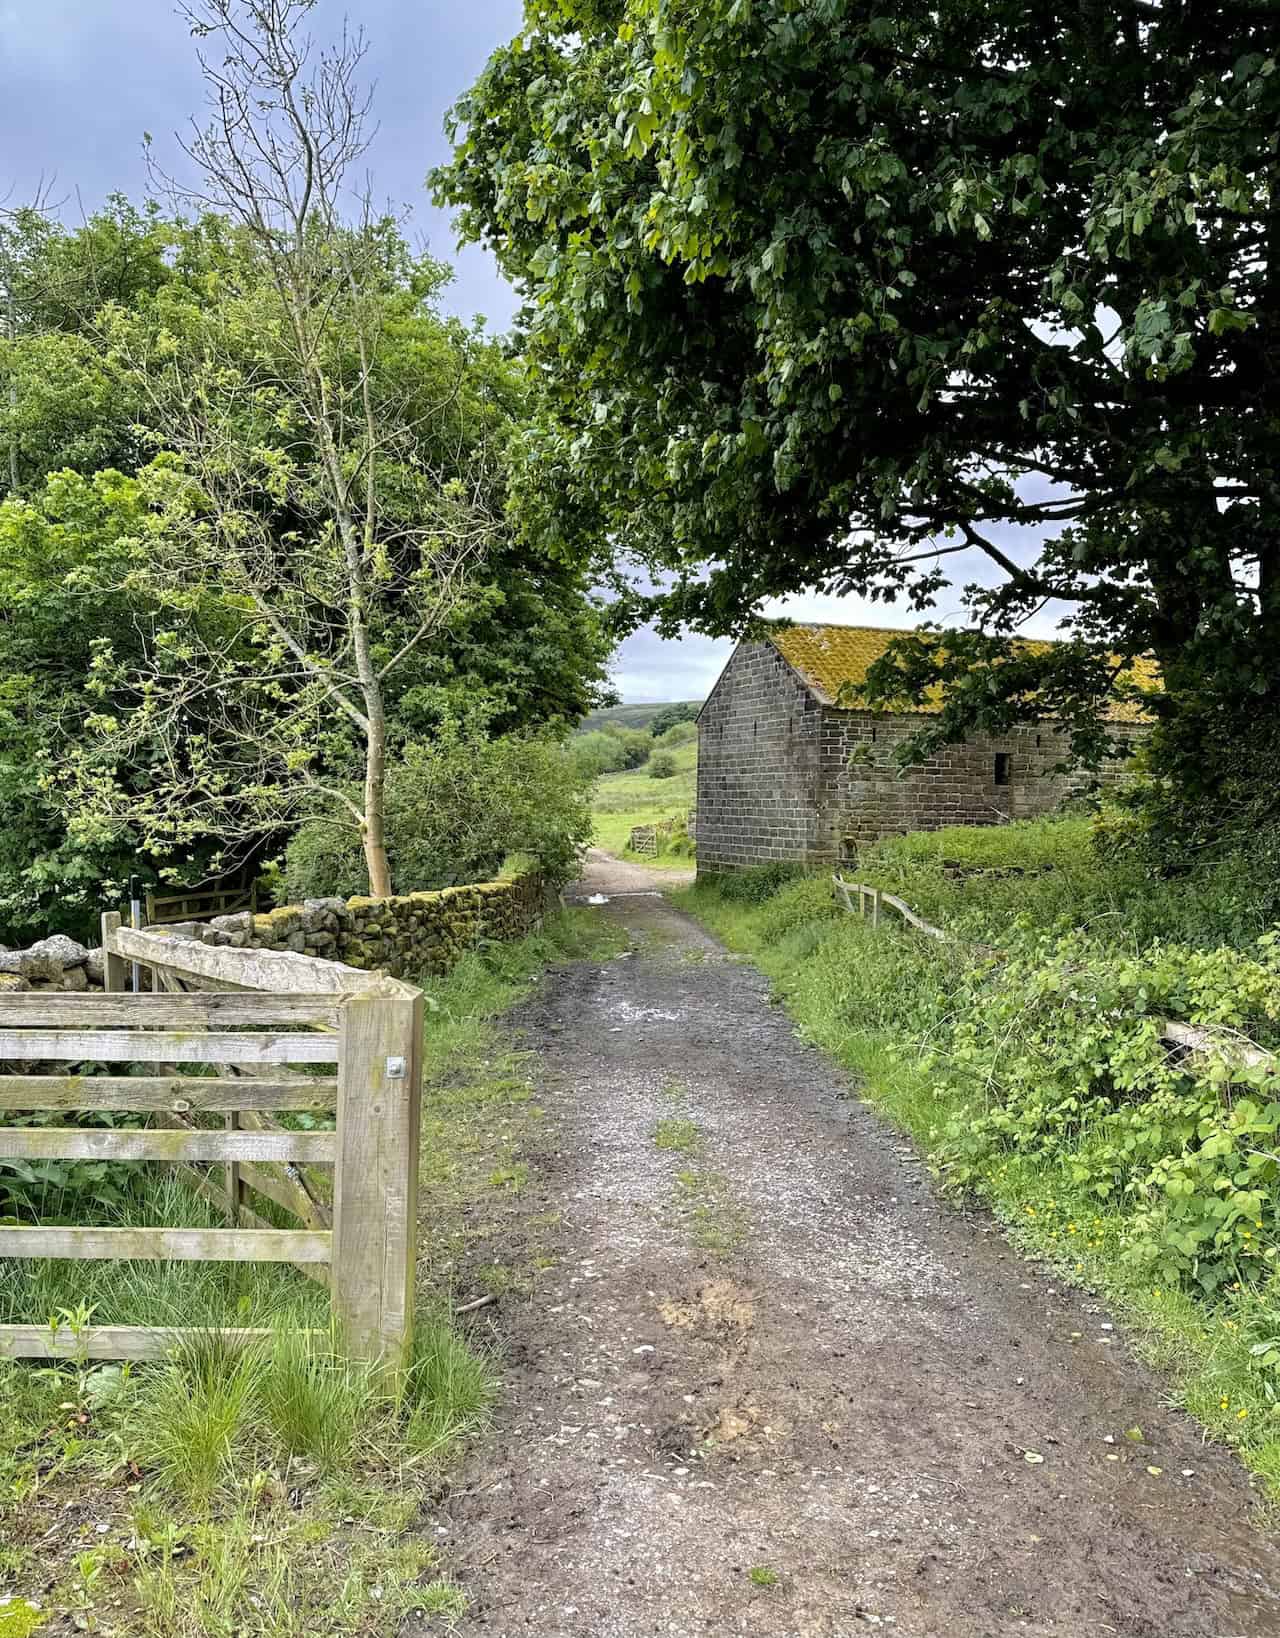 As I approach High House Farm, Daleside Road (Track) transitions from a grassy route to a more substantial stone track.